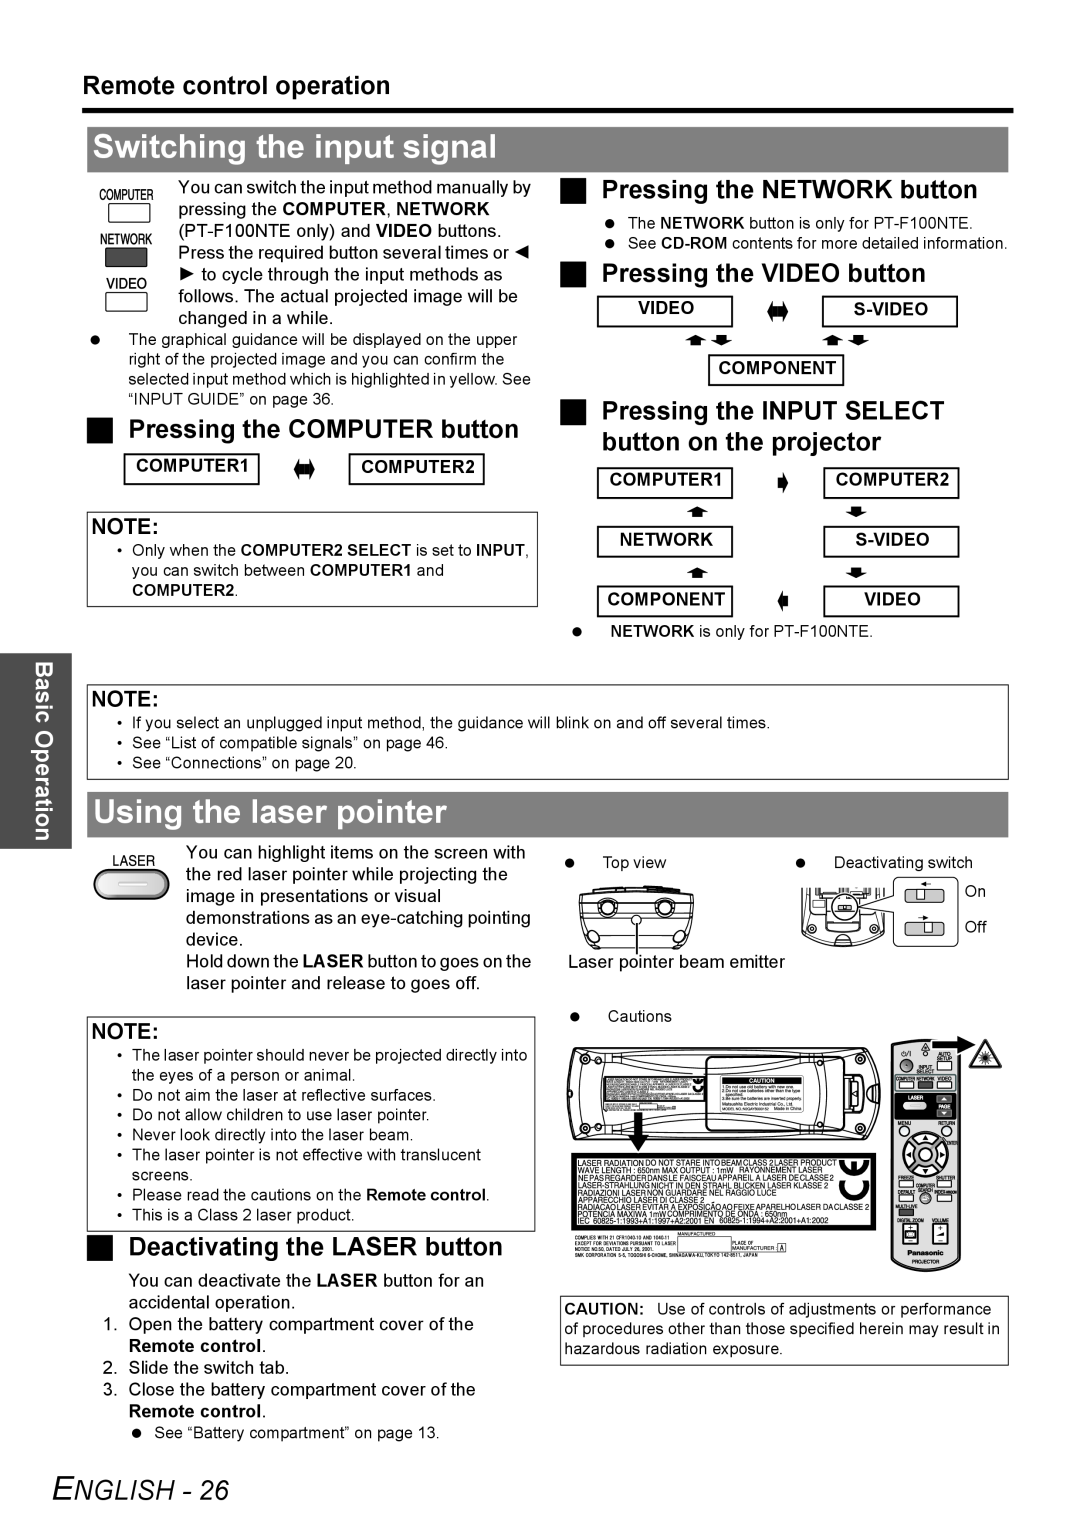 Philips PT-F100NTE manual Switching the input signal, Using the laser pointer, Remote control operation, English 